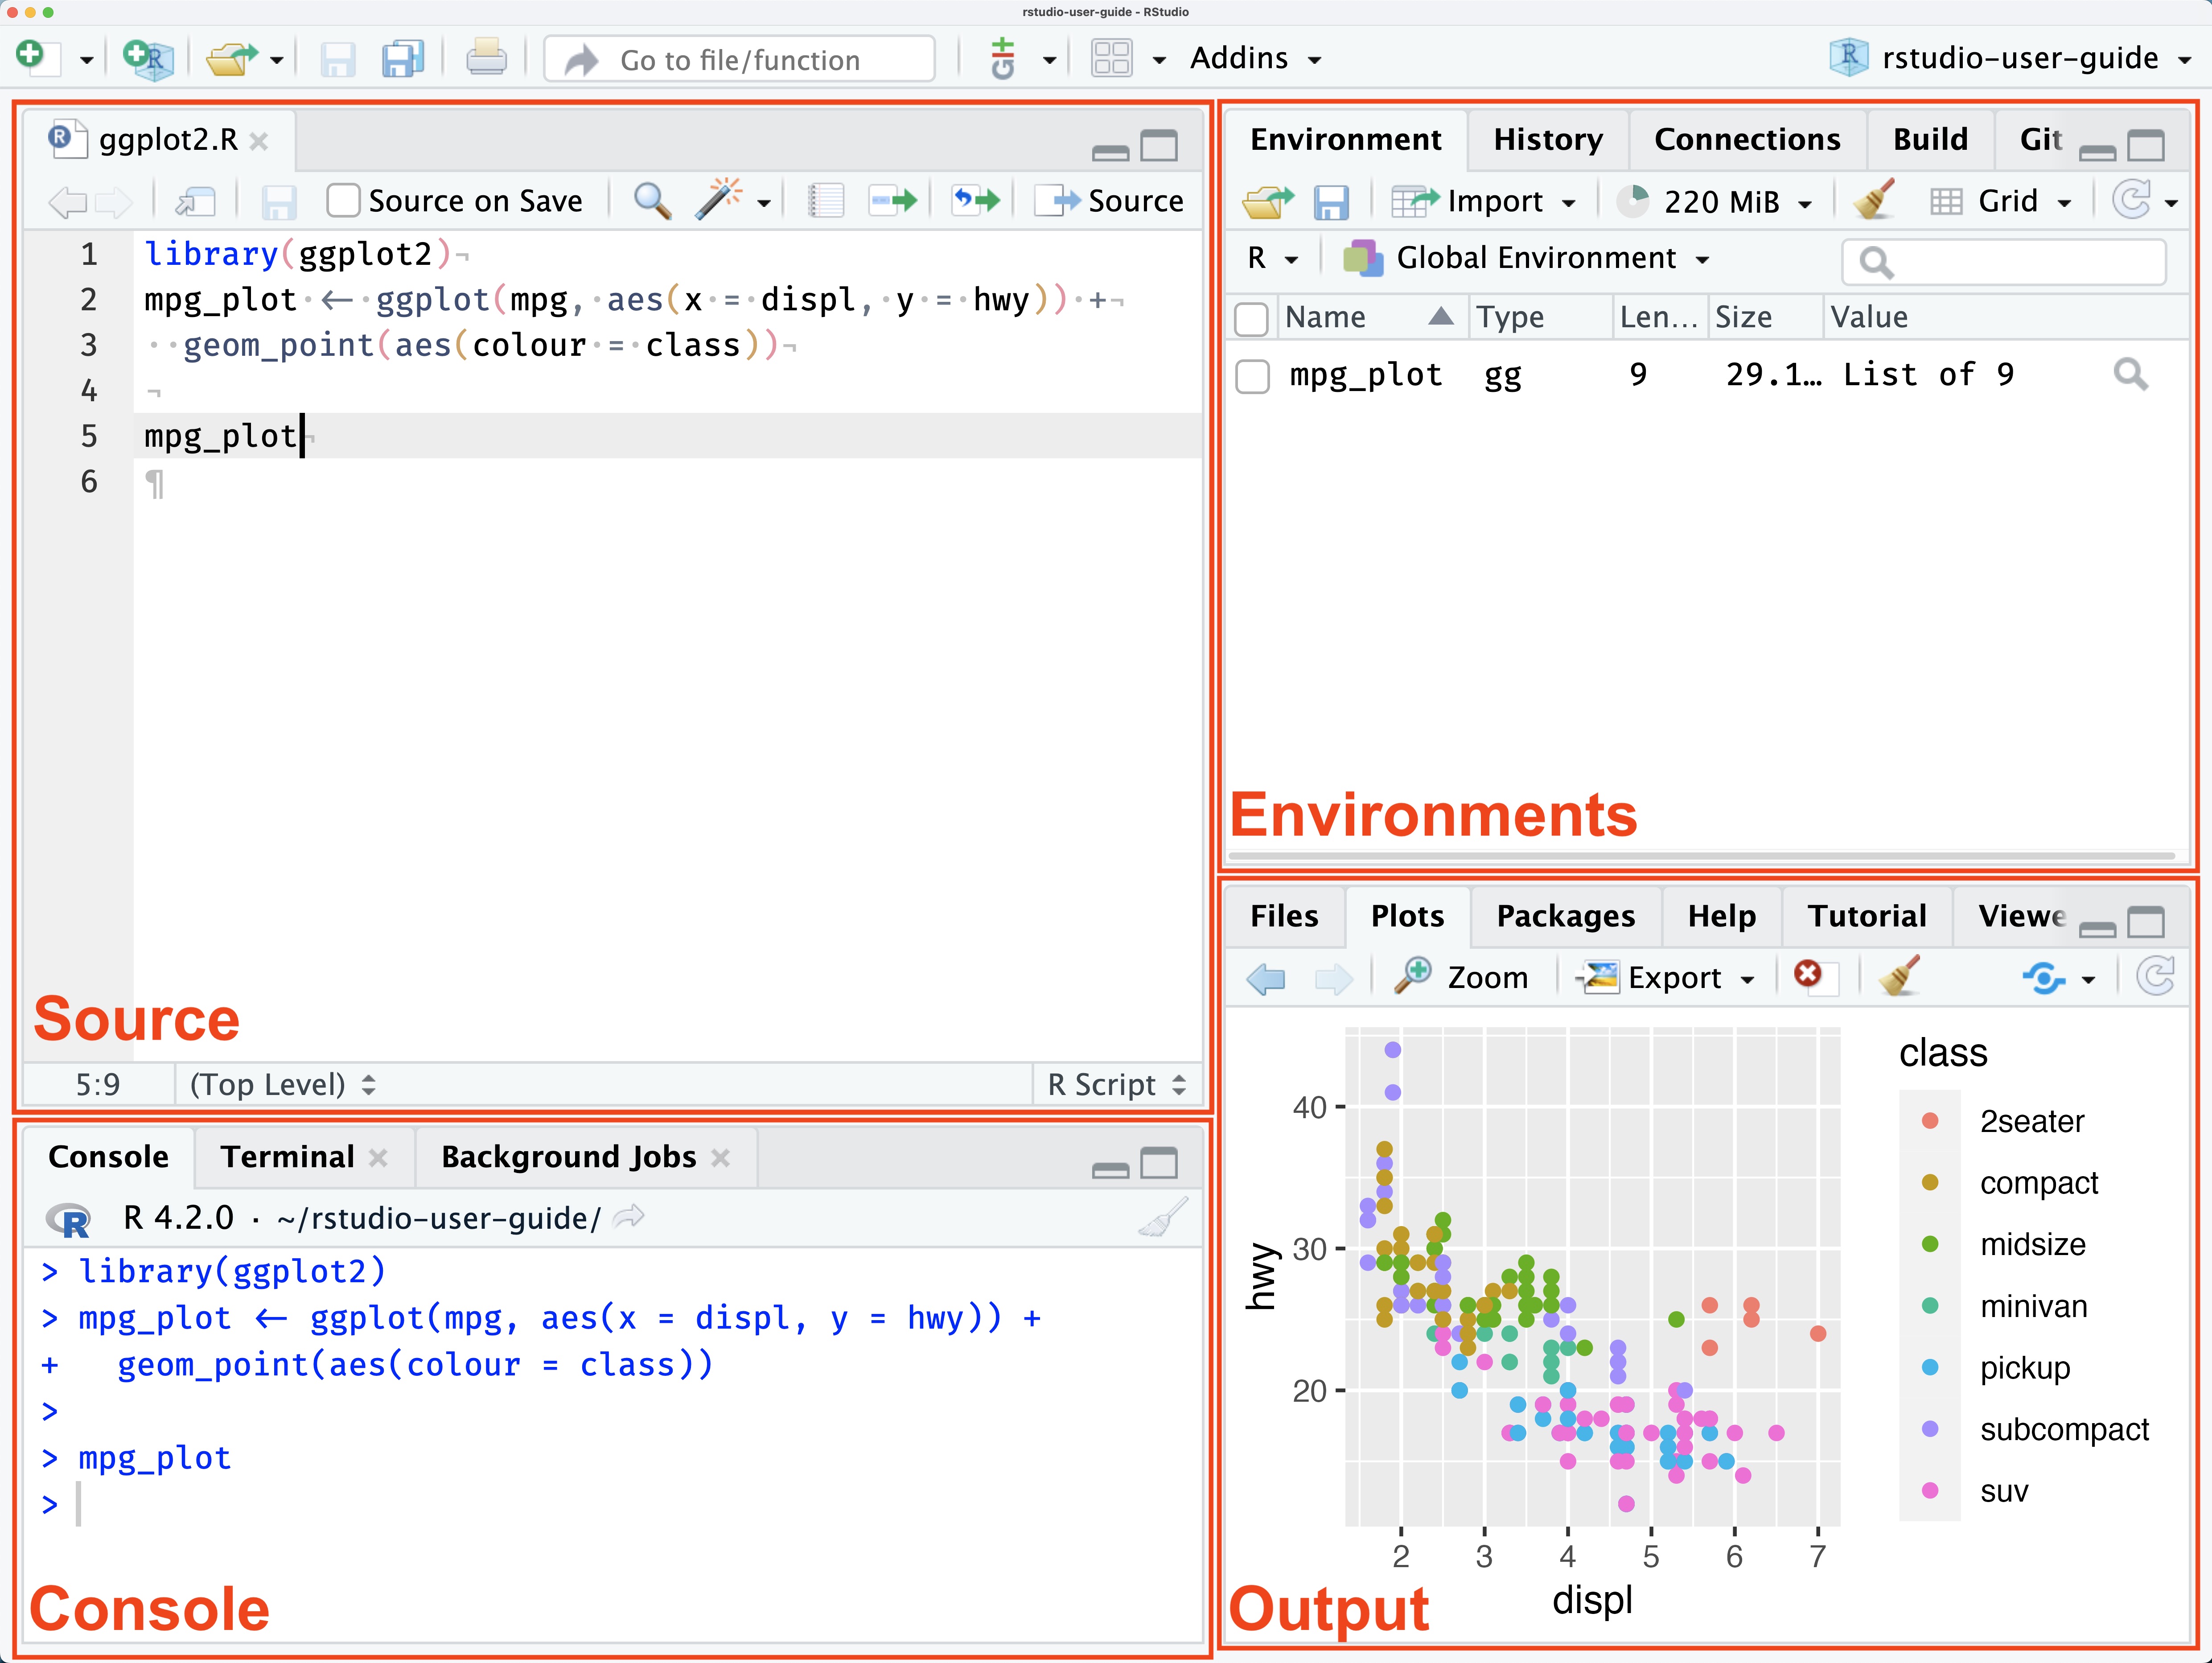 A screenshot of the four RStudio panes, labeled Source, Environments, Console, and Output.